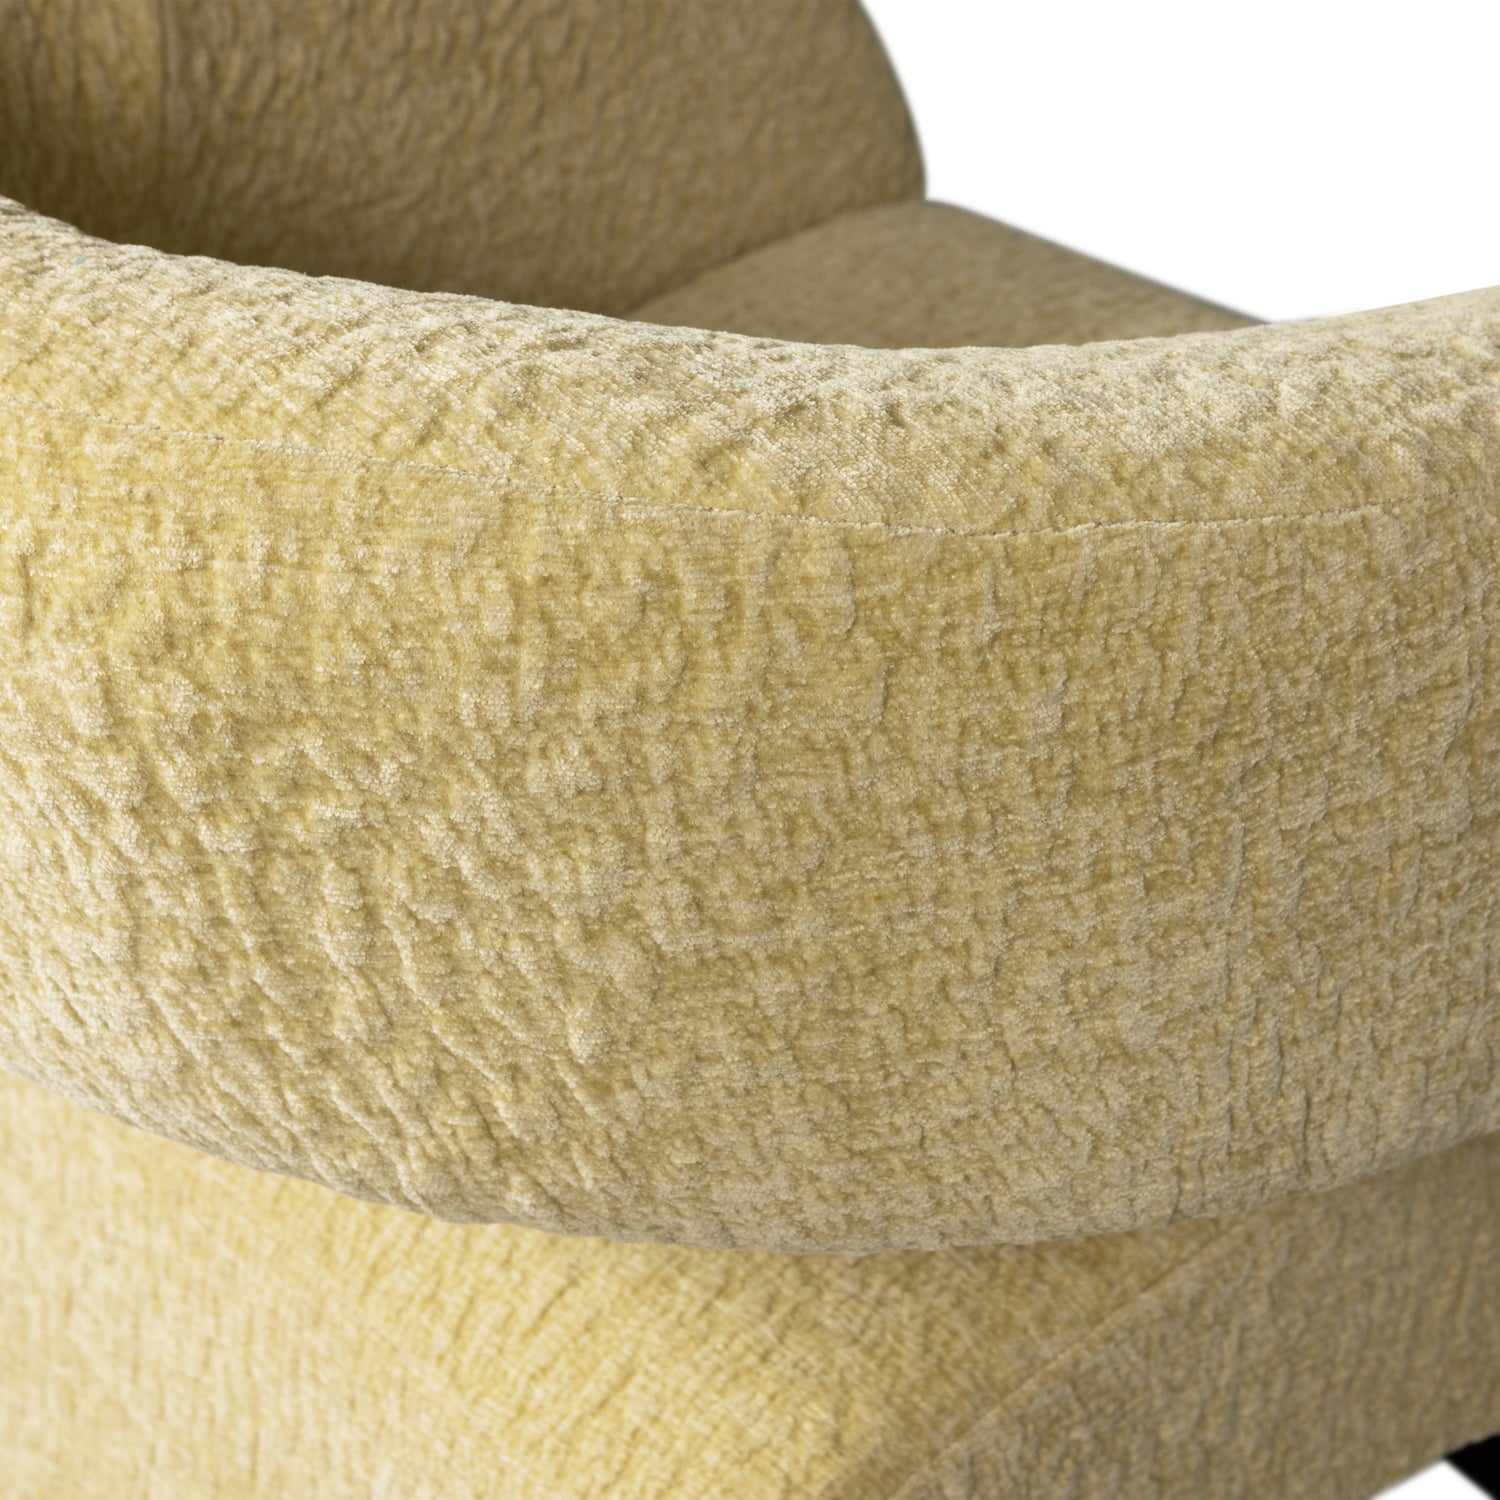 801432-L-02_VS_BP_Radiate_fauteuil_textured_lime_detail.png?auto=webp&format=png&width=1500&height=1500